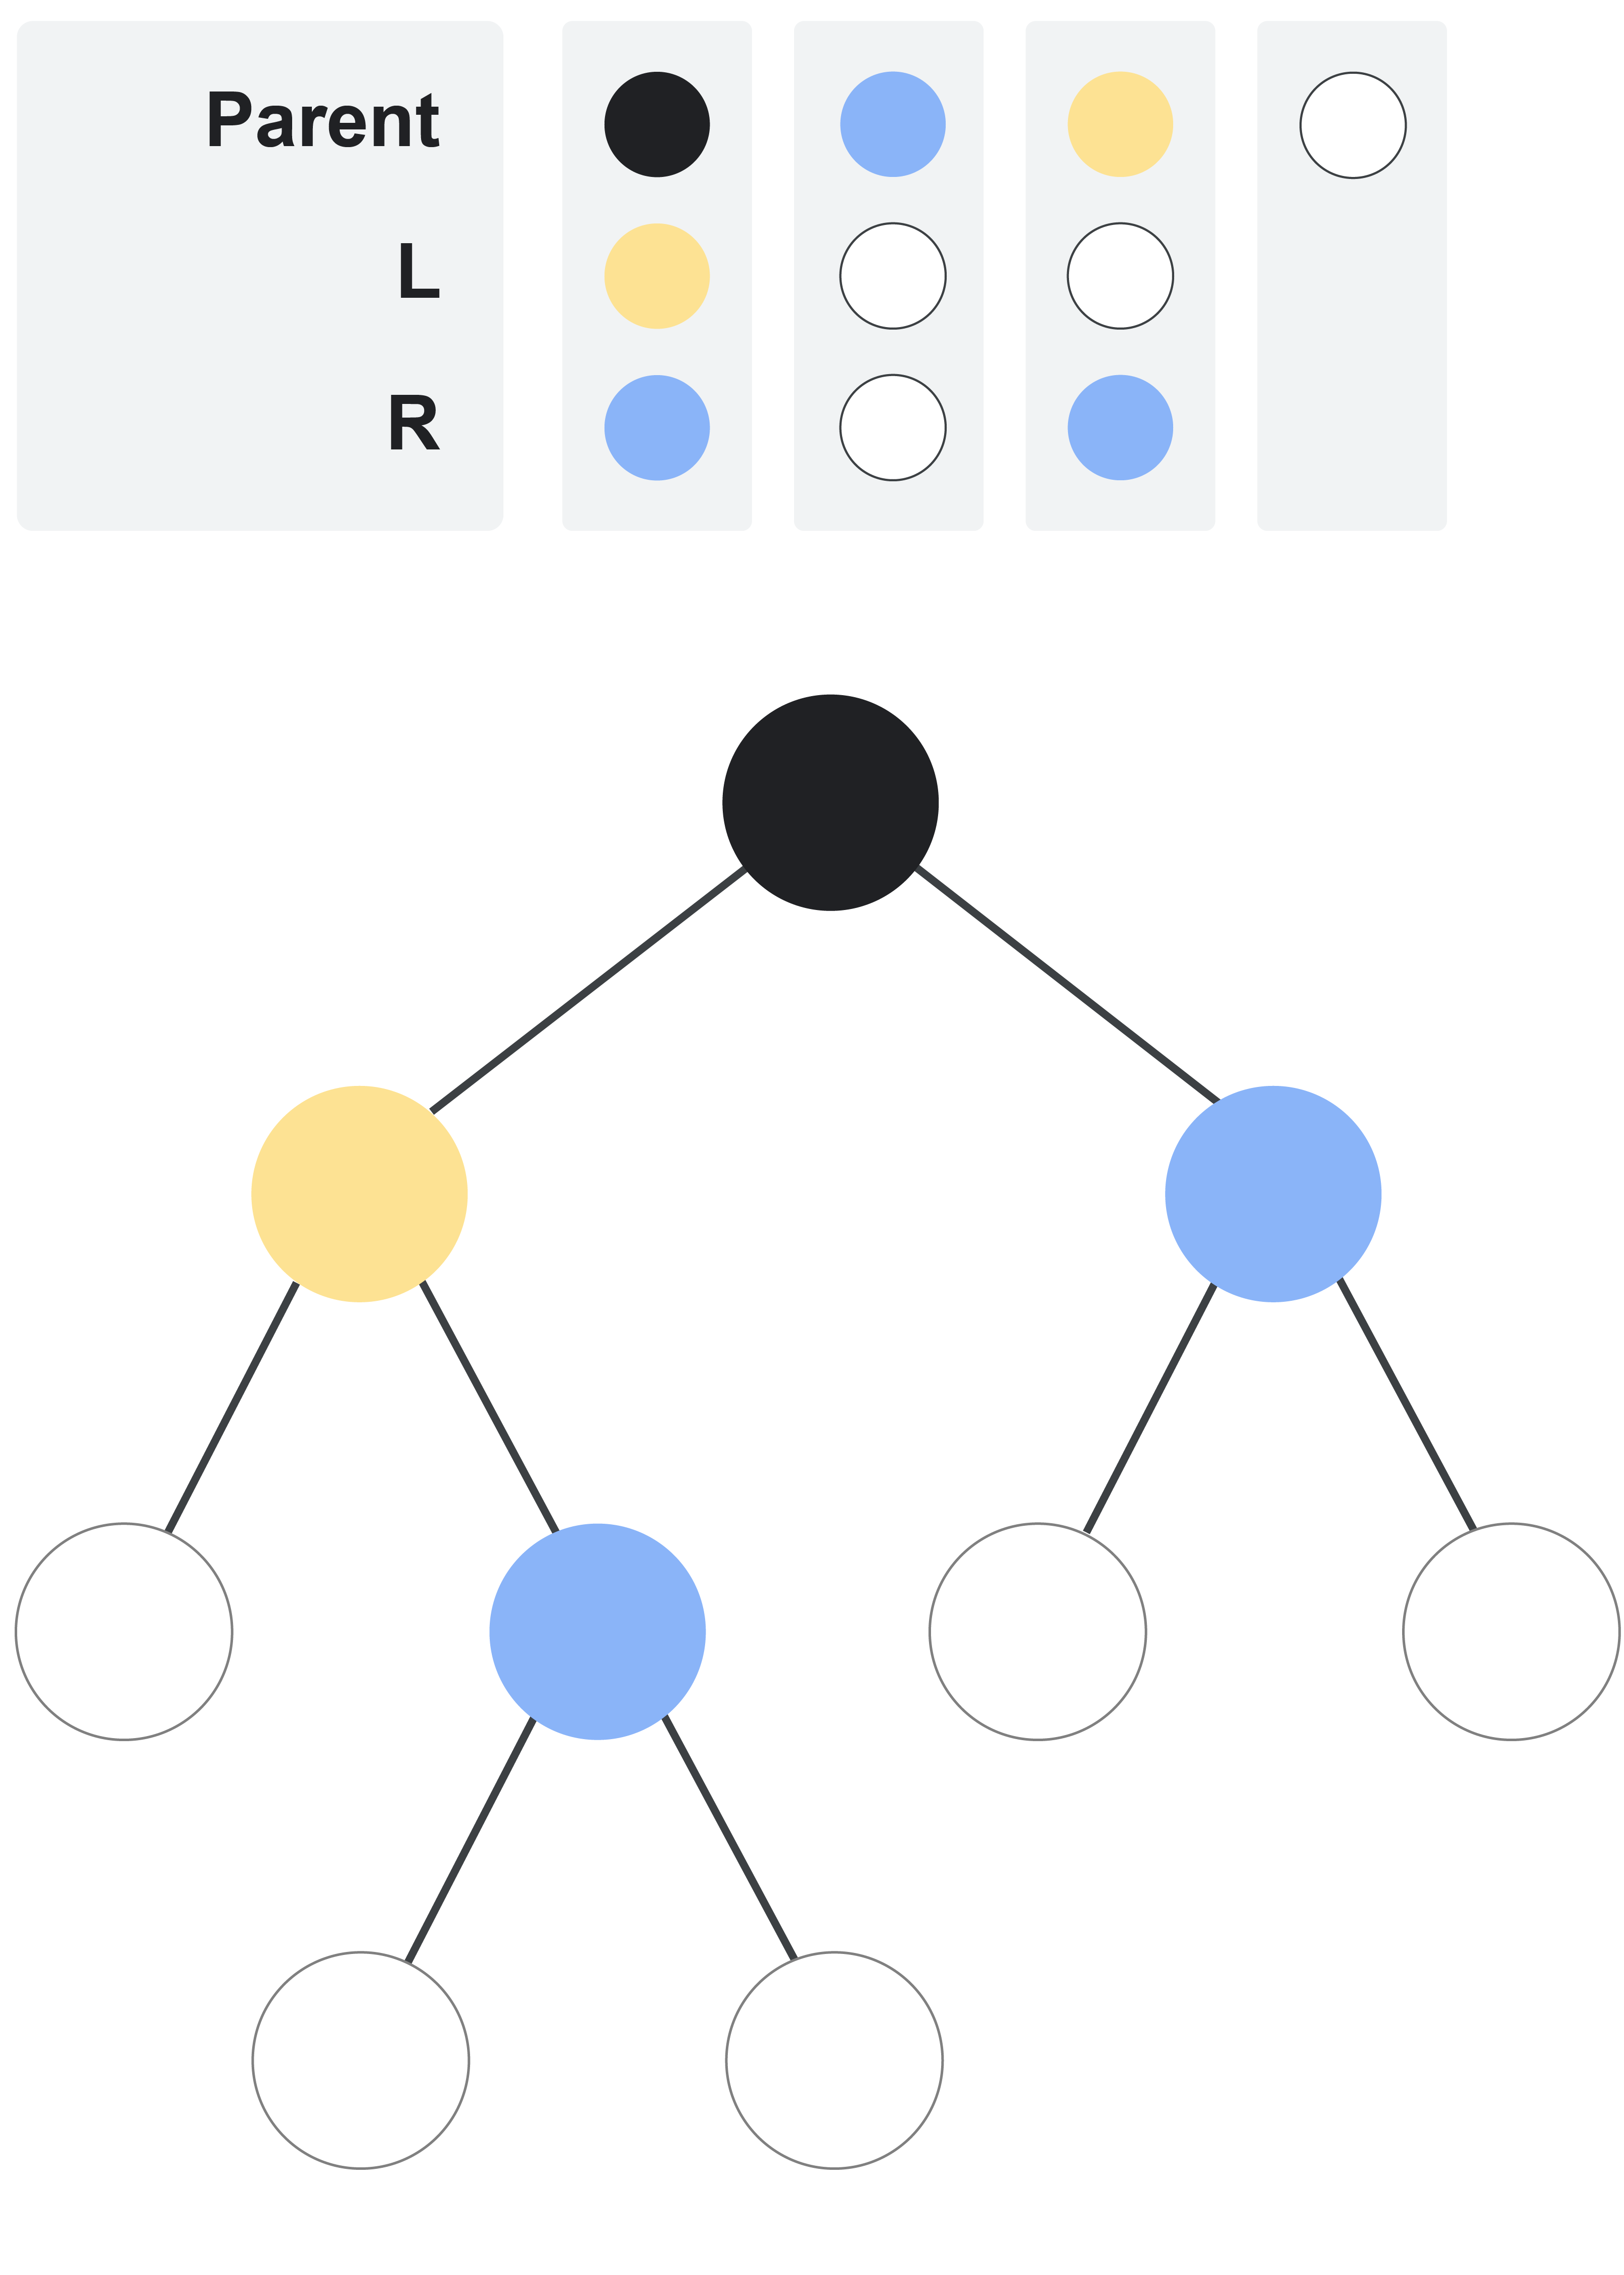 A tree with colored nodes